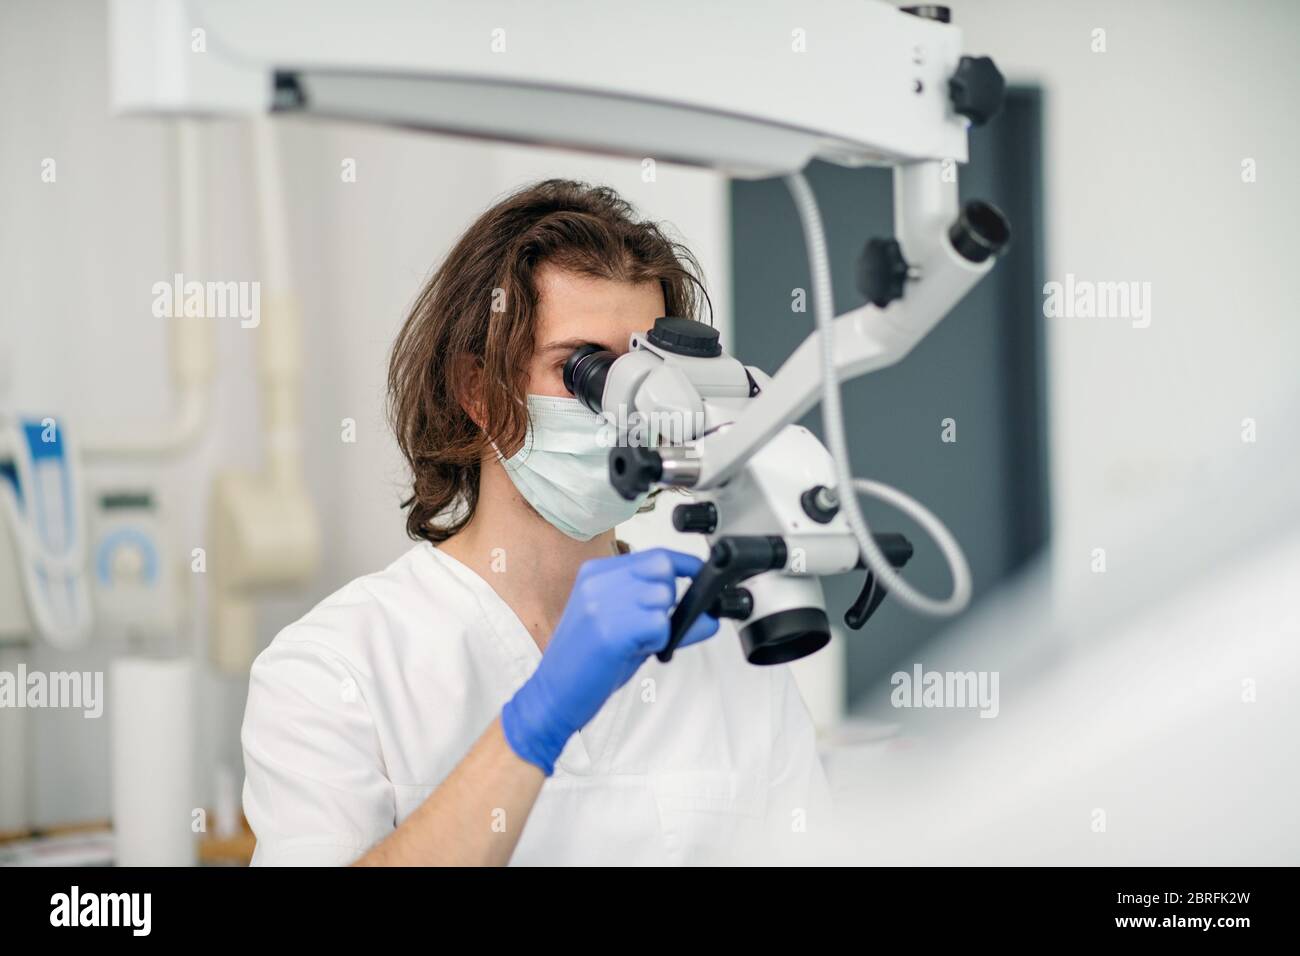 Unrecognizable dentist with face mask working in dental surgery. Stock Photo